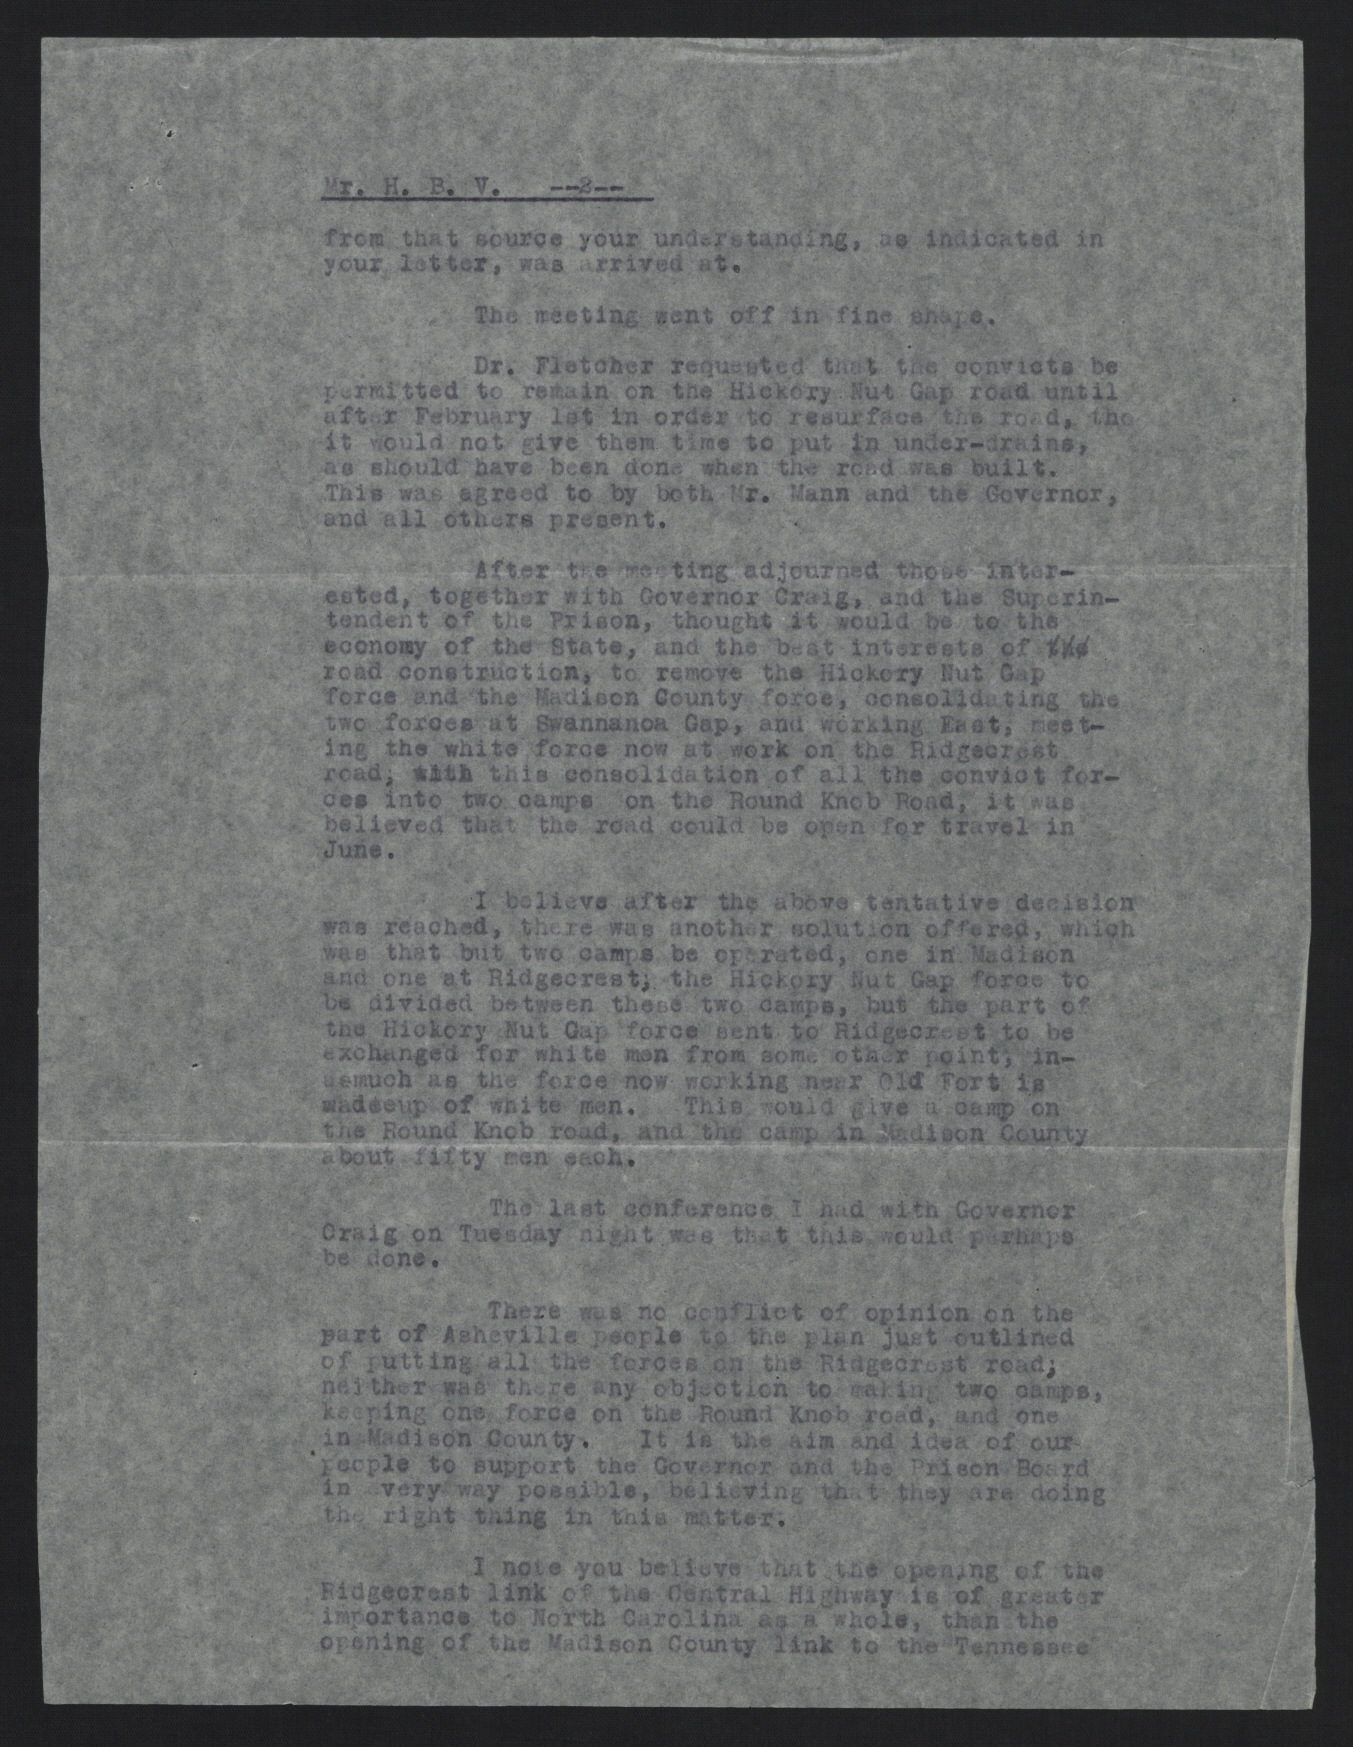 Letter from Buckner to Varner, January 15, 1916, page 2